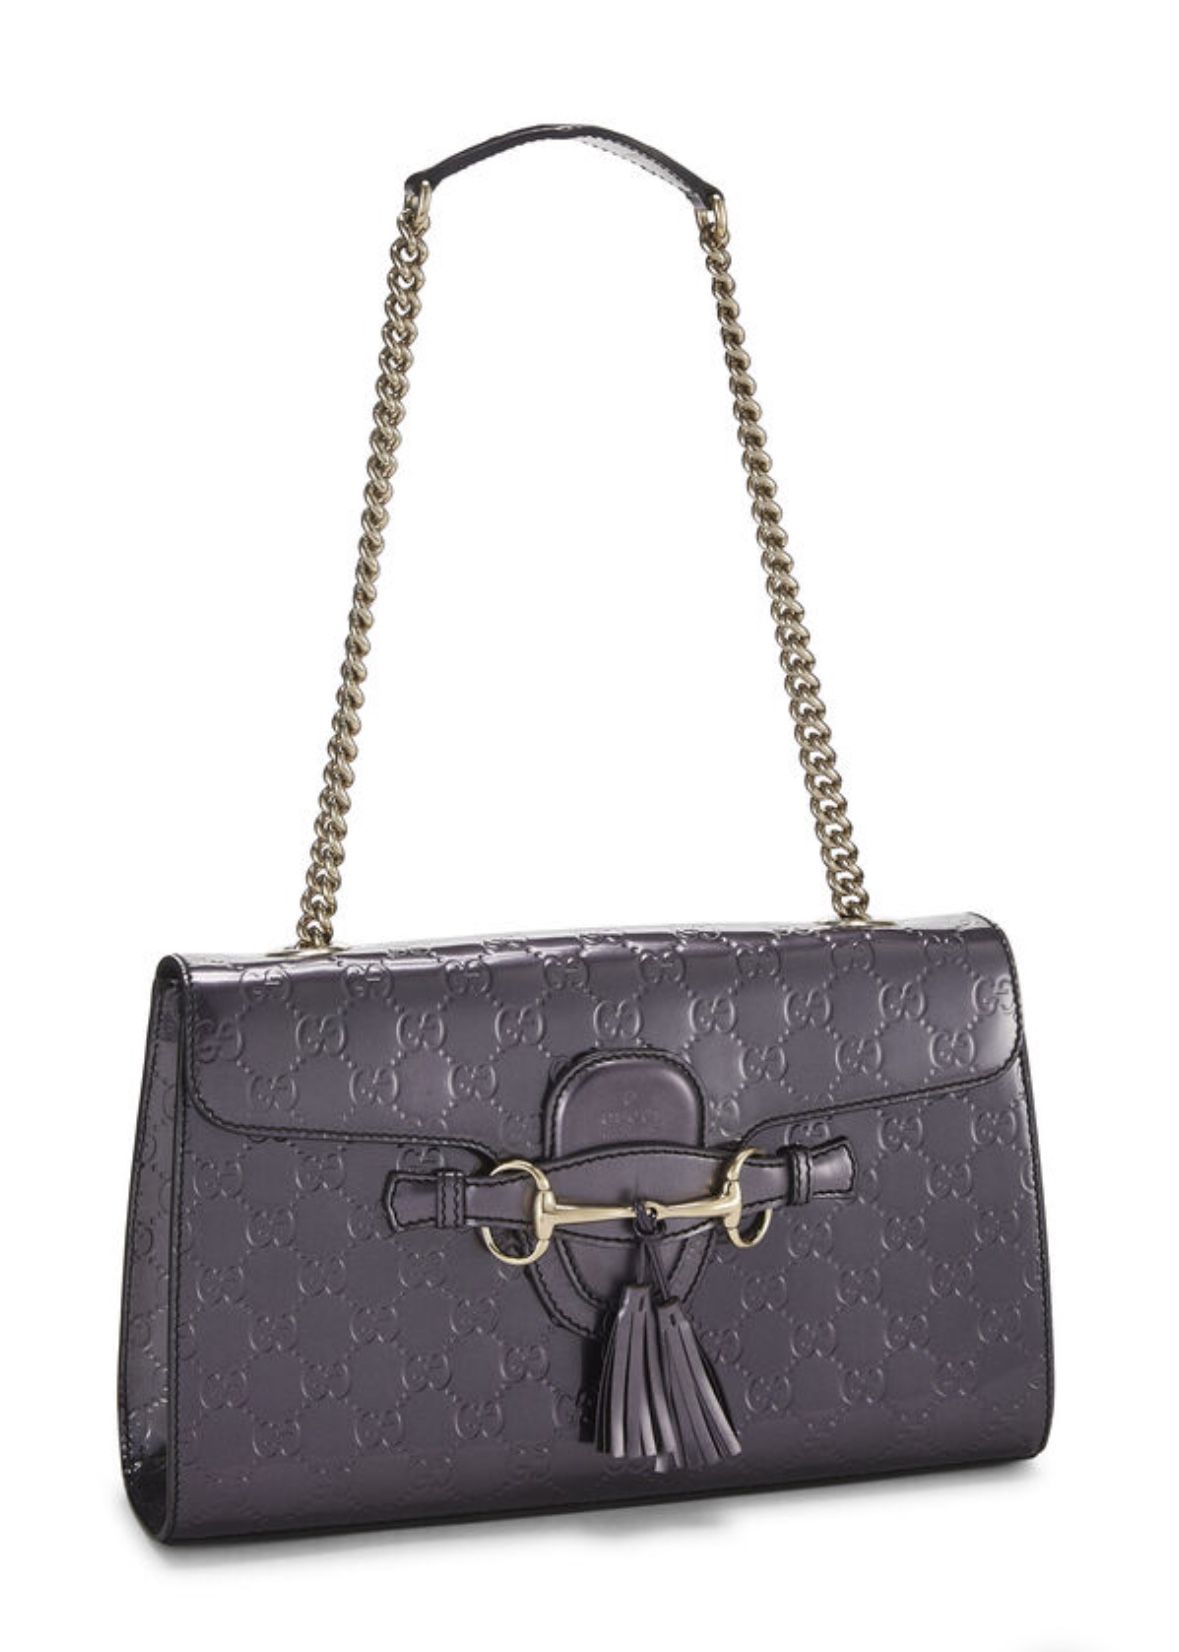 Brand New Gucci Gray Purple Grey Guccissima Patent Leather Emily Chain Shoulder Bag $780 !!!ACCEPTING OFFERS!!!